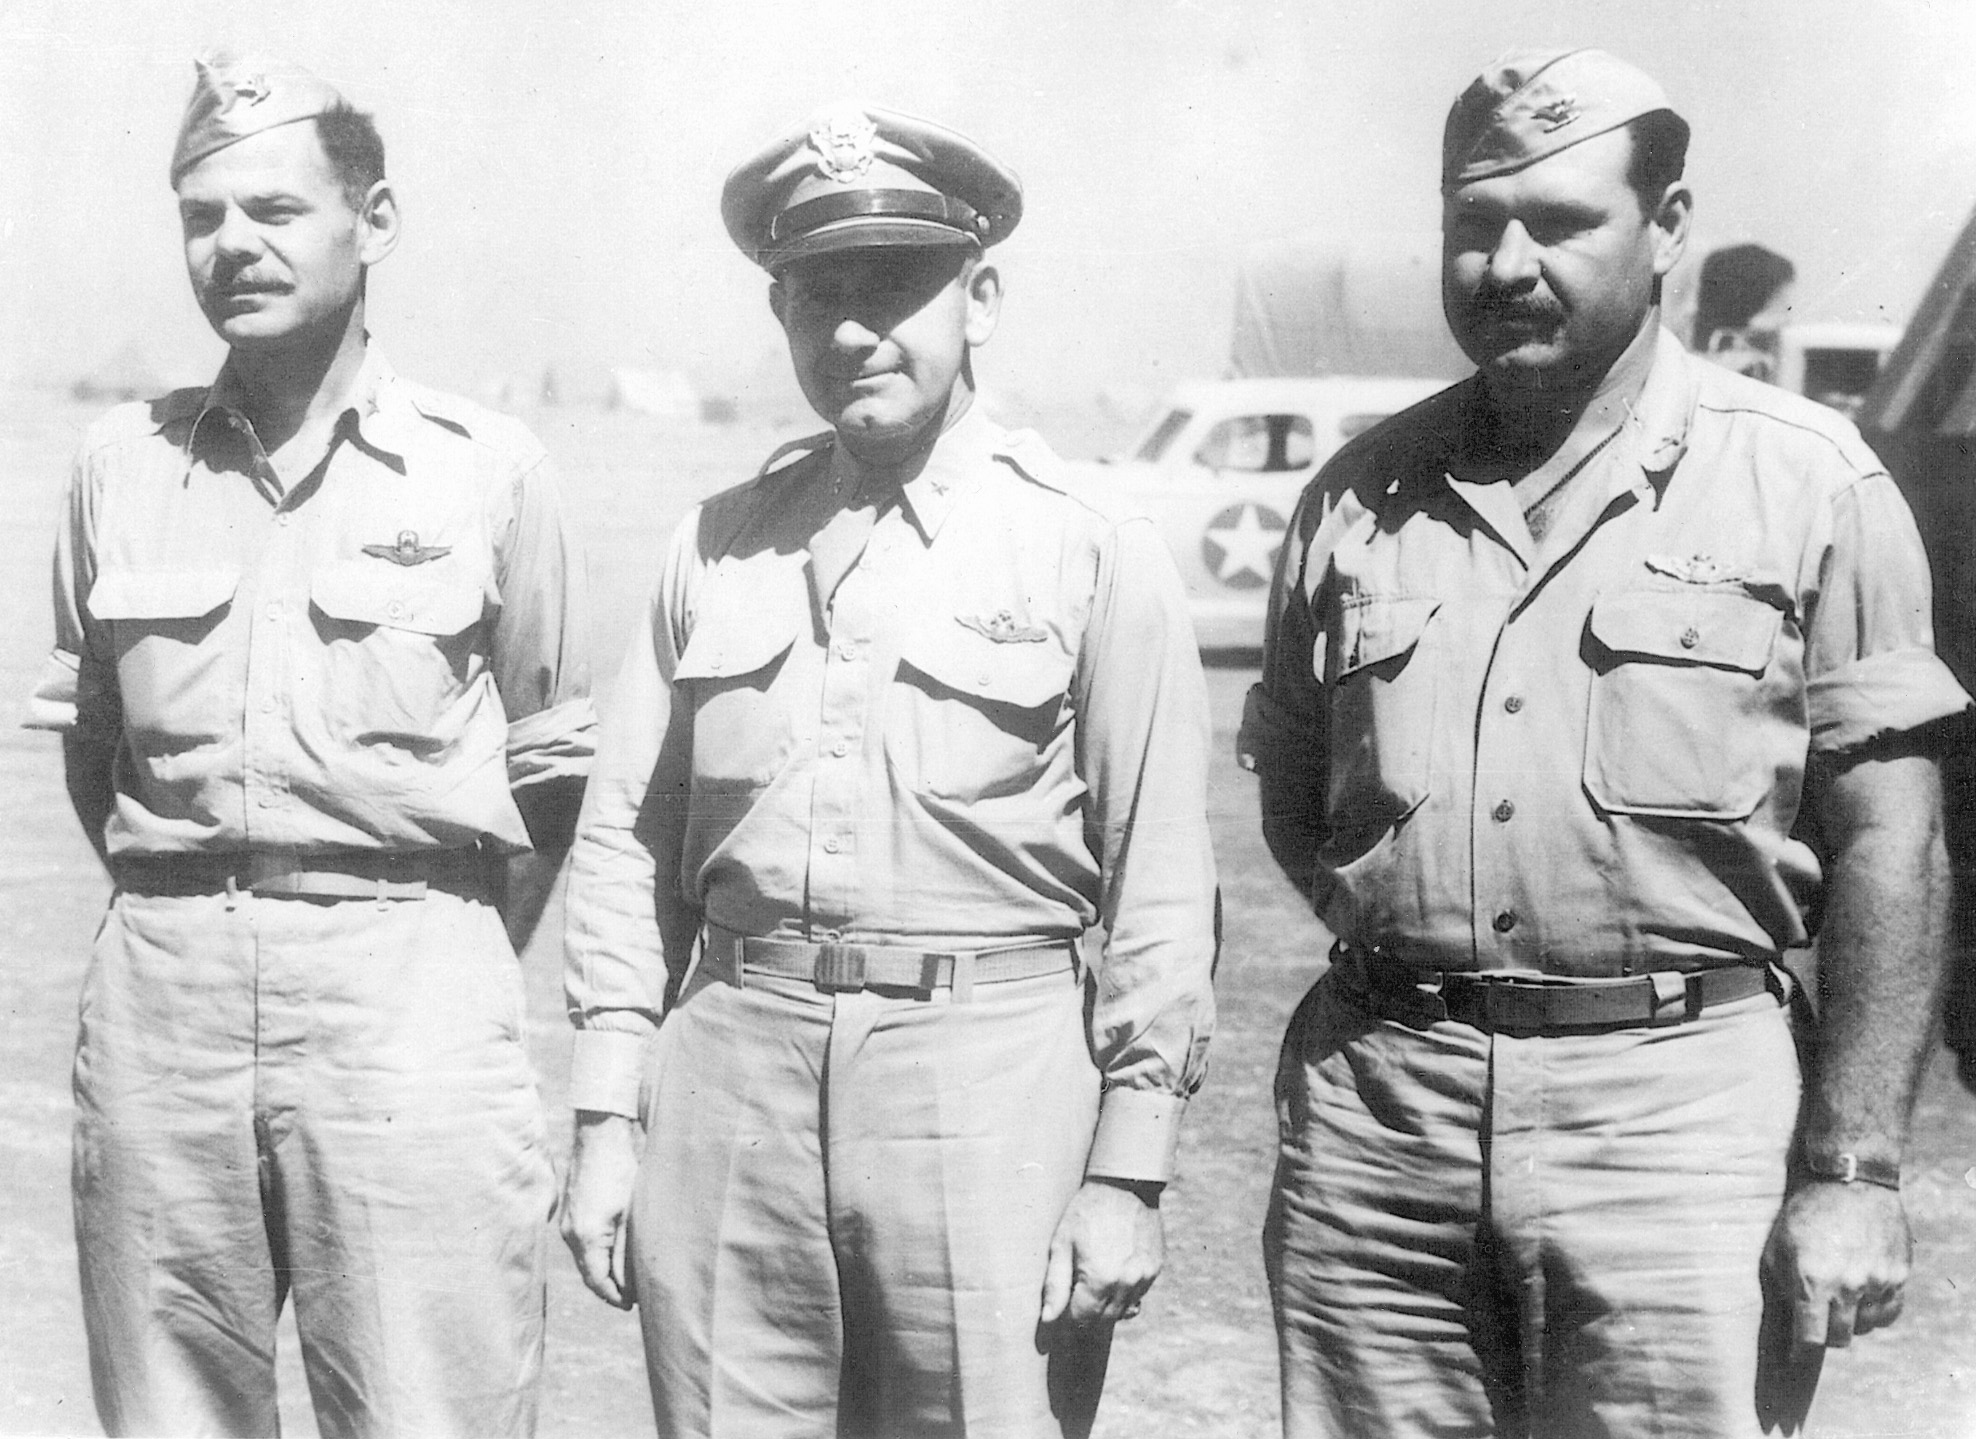 The Ploesti participants included (left to right) Colonel Leon M. Johnson, commander of the 44th Bomb Group; Brigadier General Uzal G. Ent, commander of IX Bomber Command; and Colonel John Kane, who led the 93rd Bomb Group. Johnson and Kane received the Medal of Honor for their heroism during the raid.